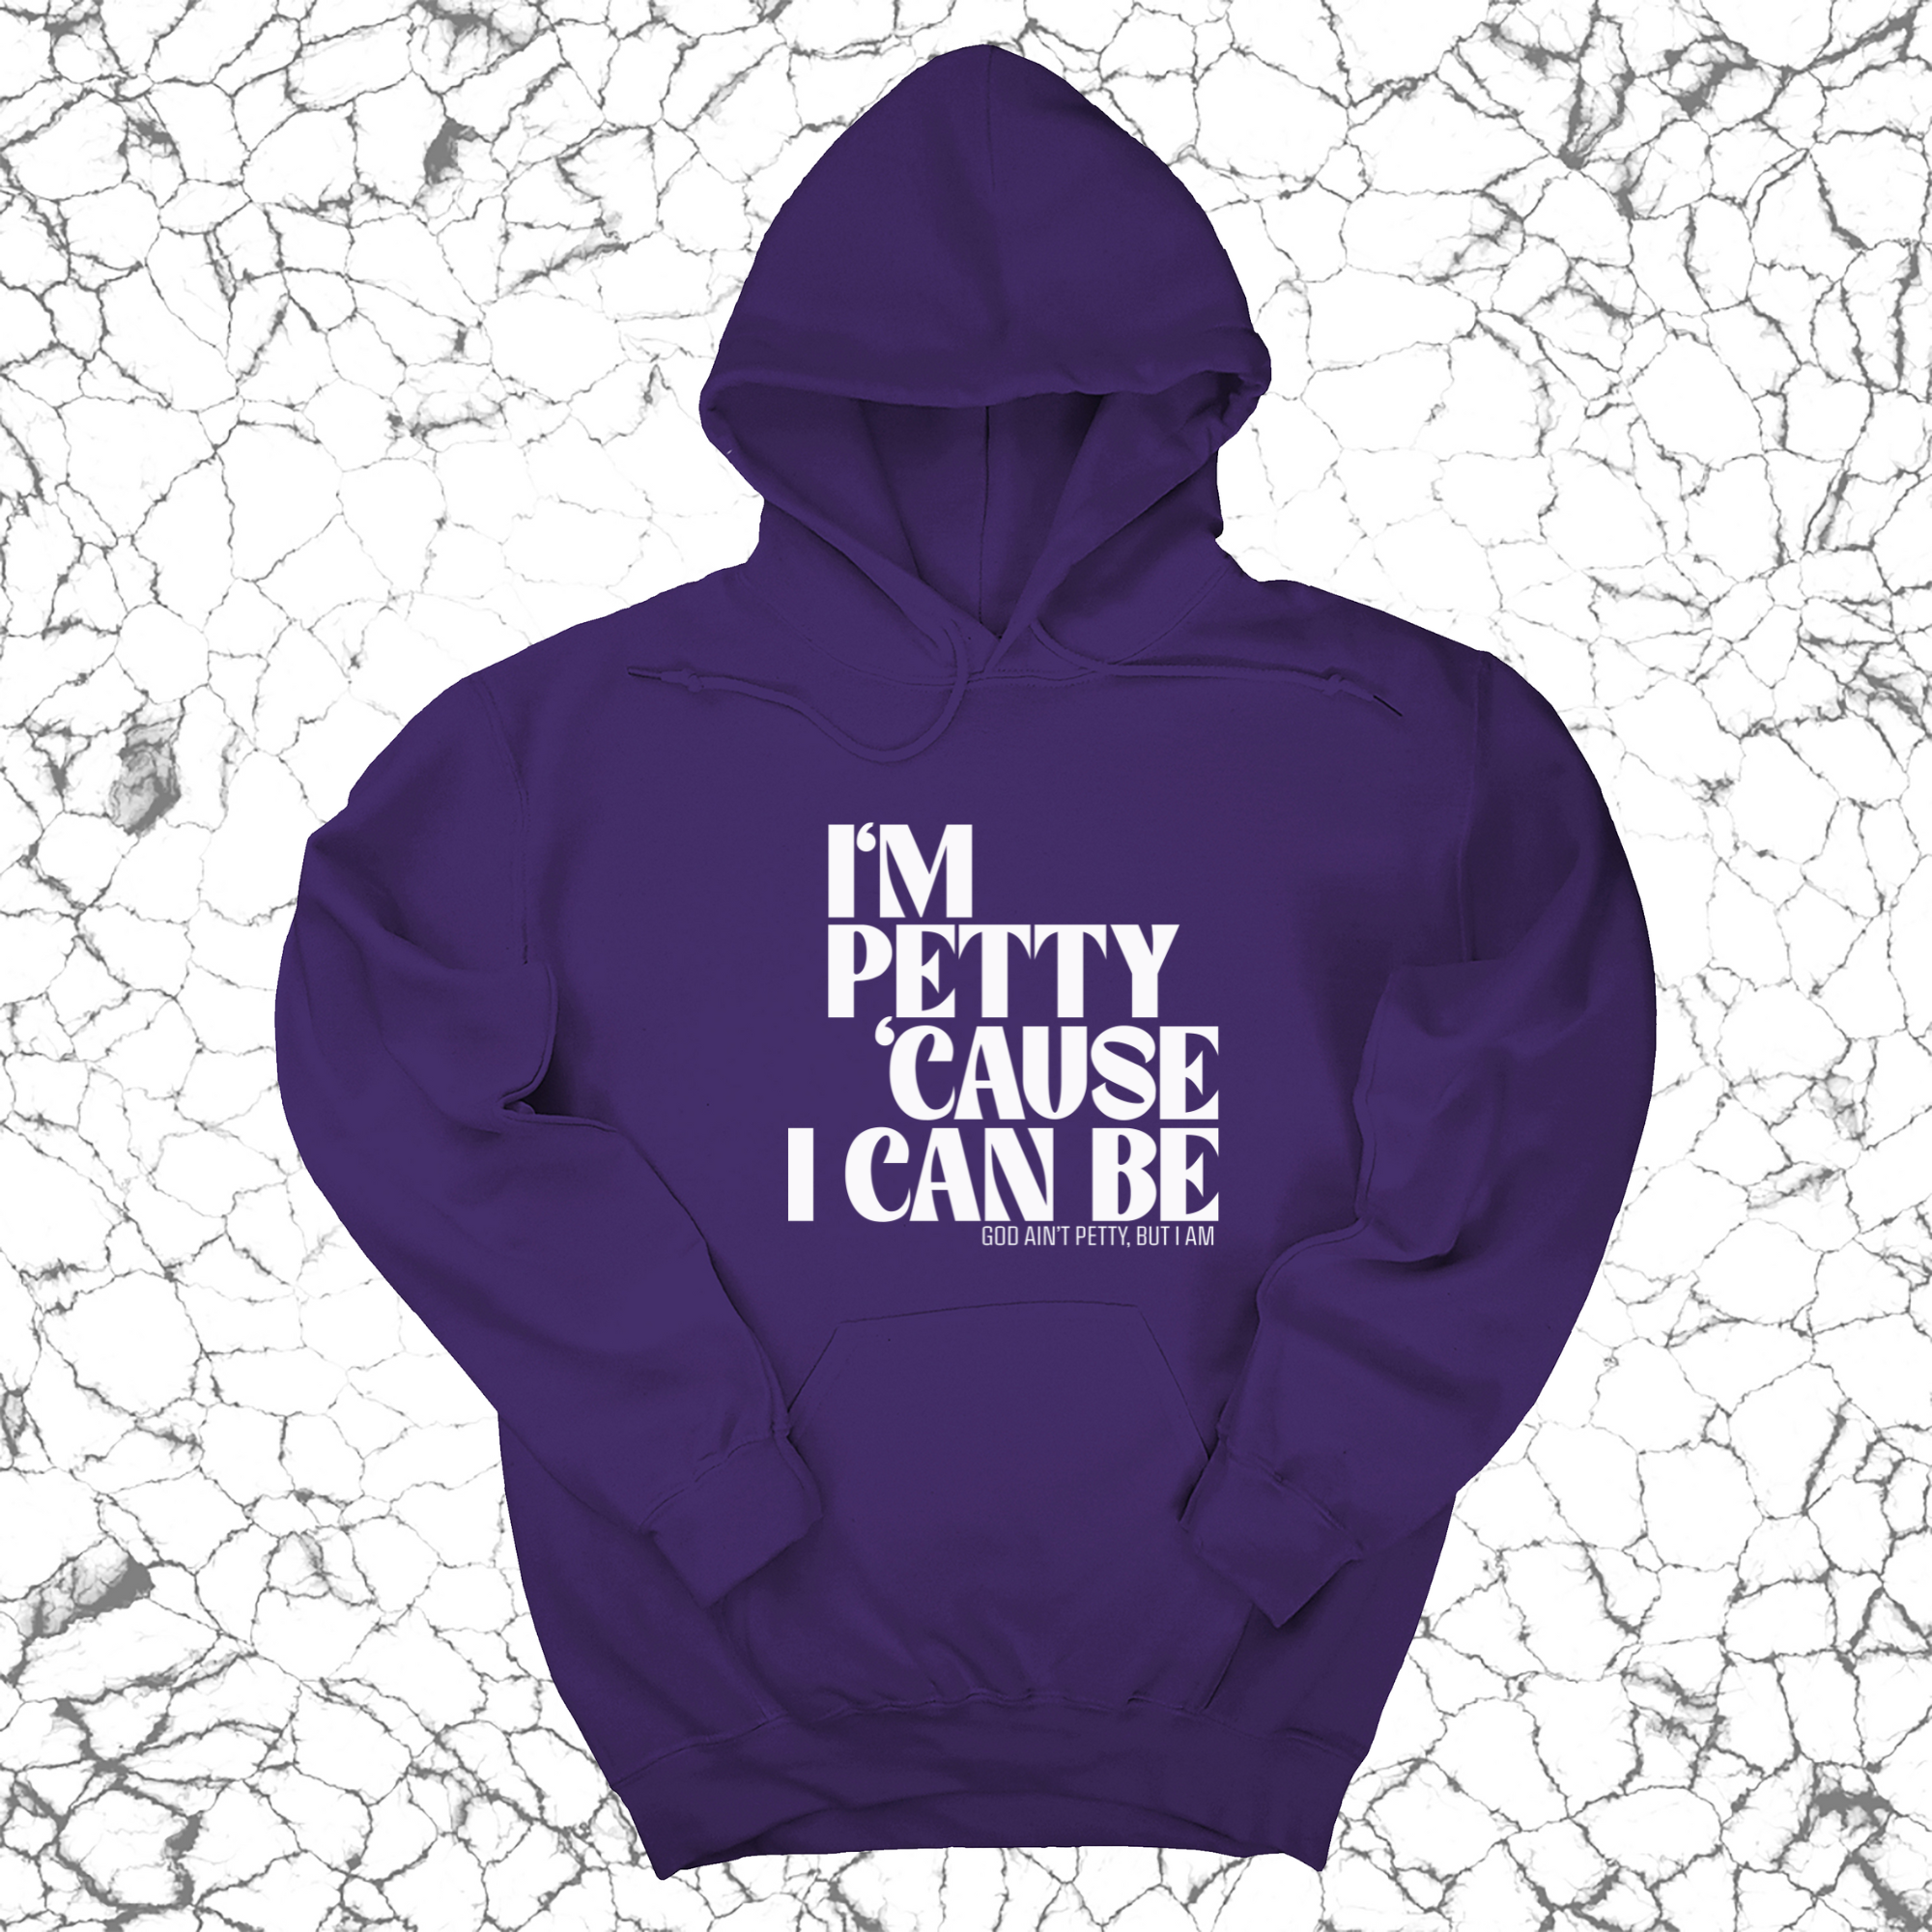 I'm petty cause I can be Unisex Hoodie-Hoodie-The Original God Ain't Petty But I Am